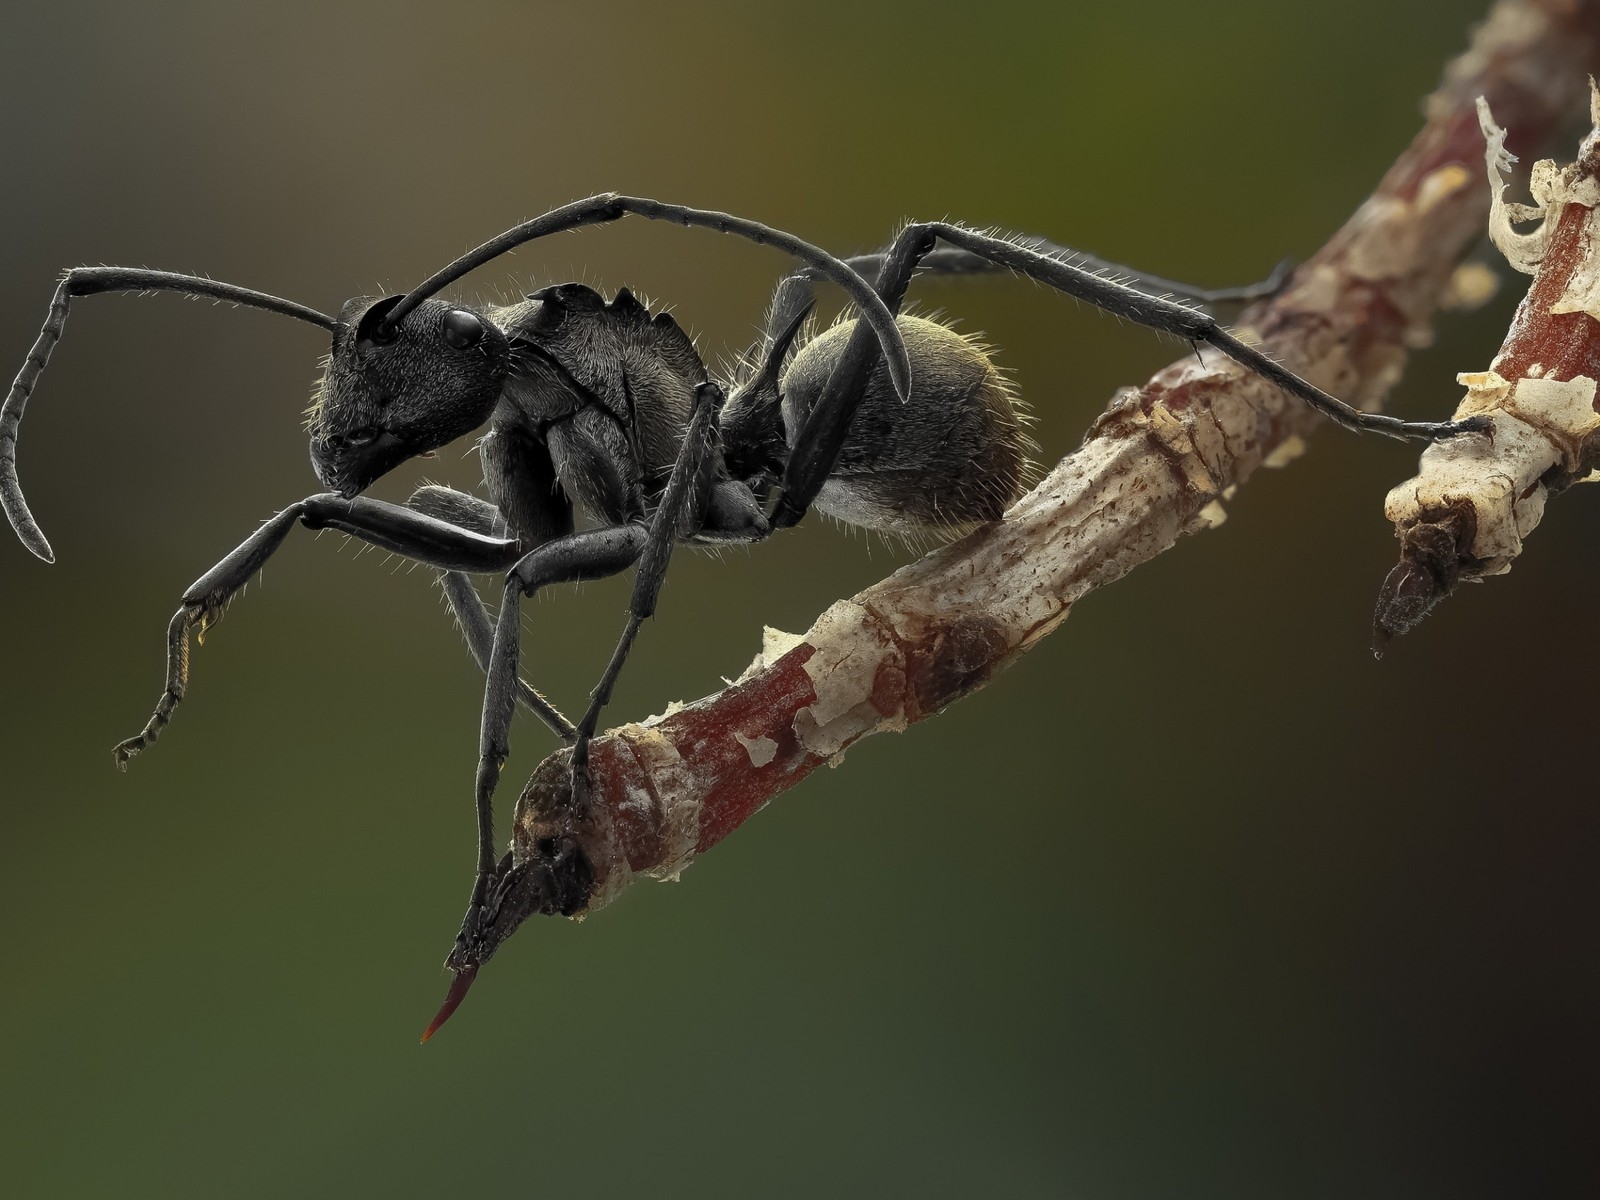 Ant Macro Photography for 1600 x 1200 resolution